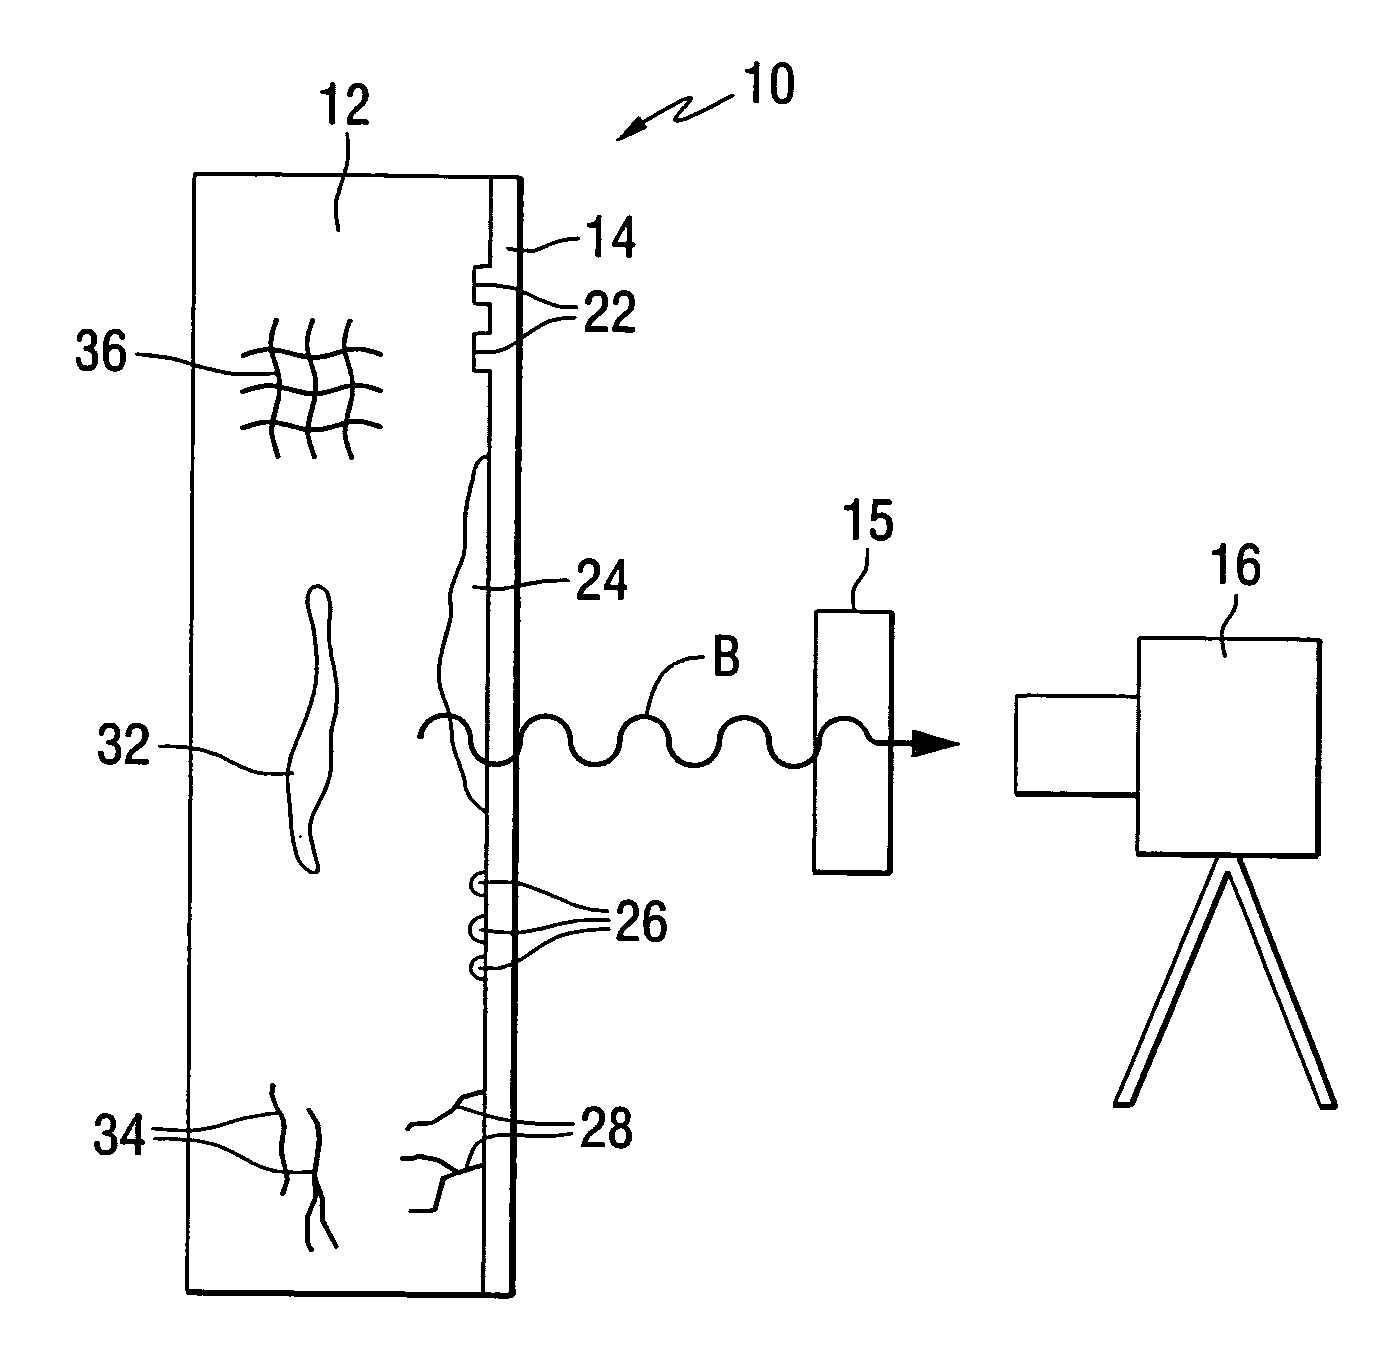 Spectral filter system for infrared imaging of substrates through coatings